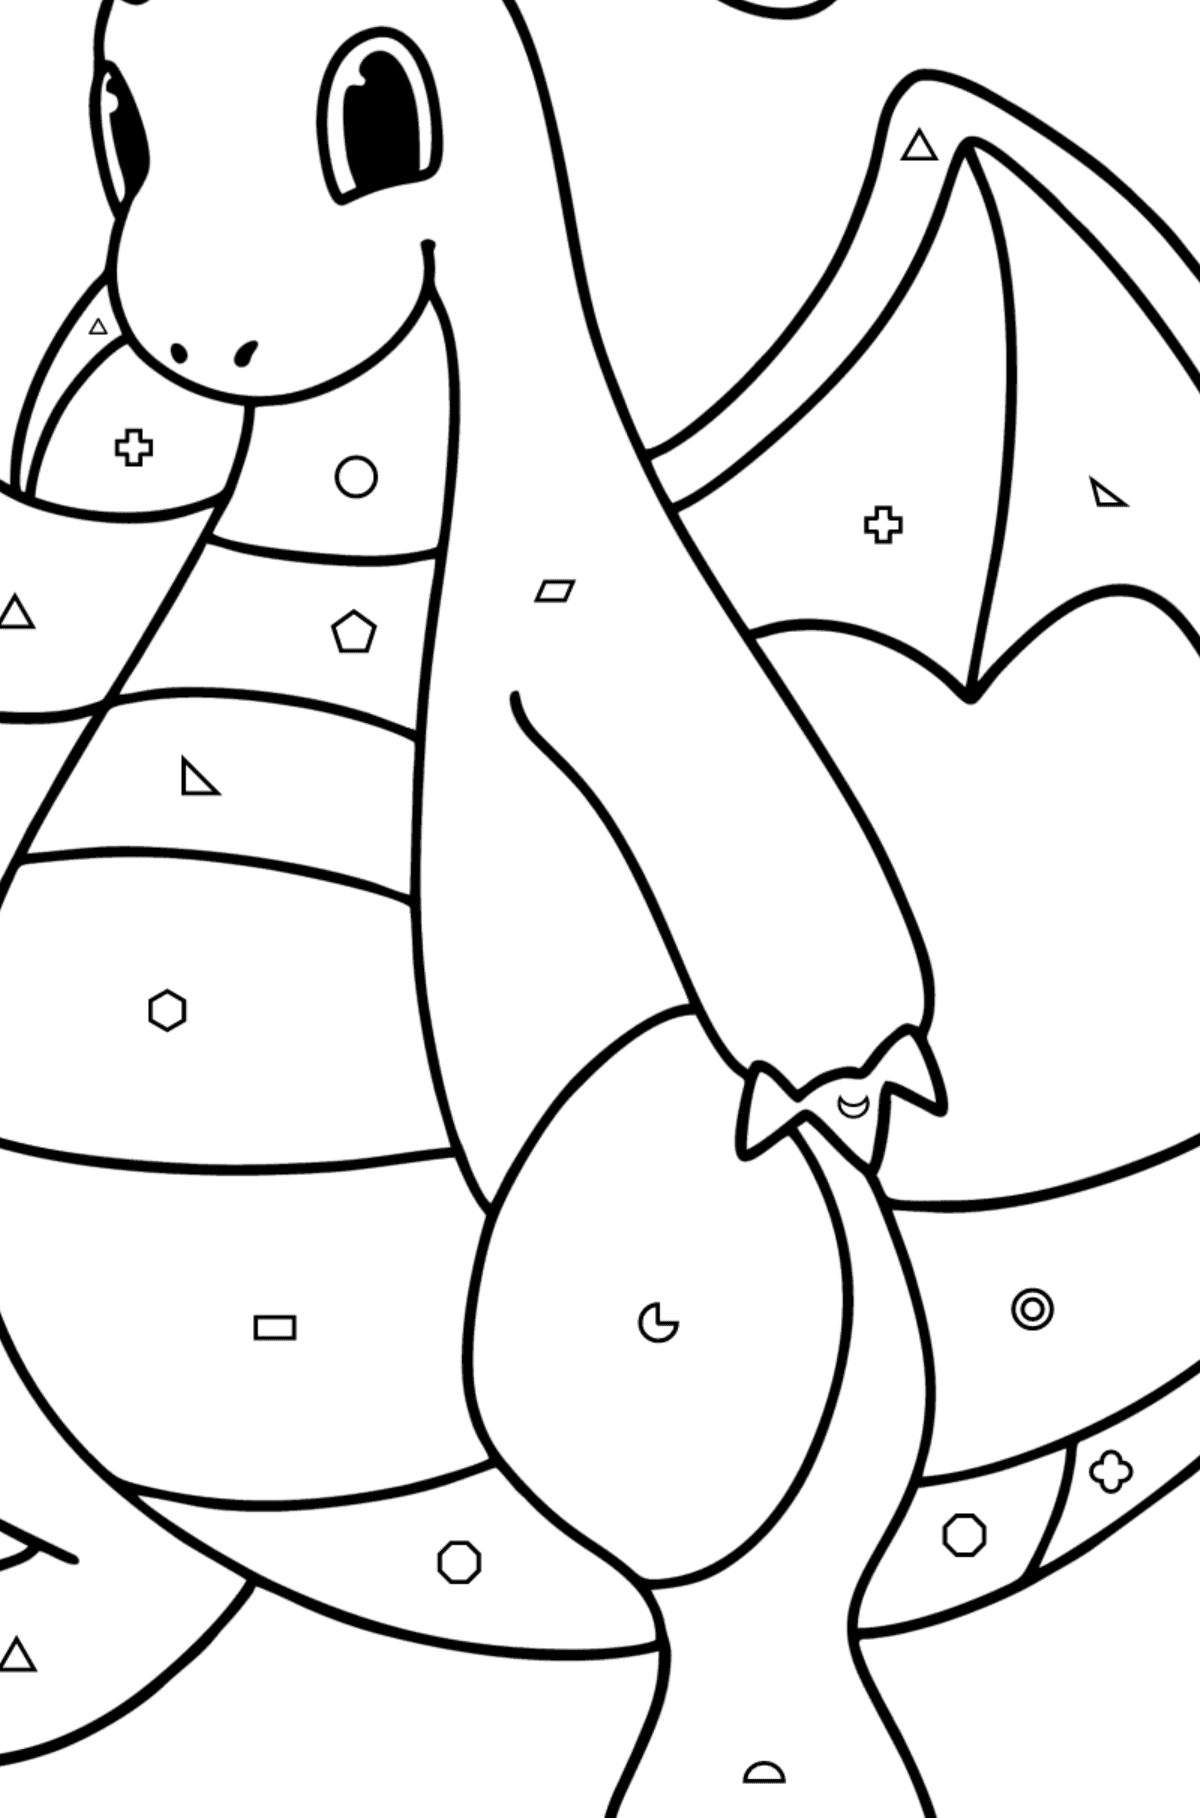 Pokemon Go Dragonite coloring page - Coloring by Geometric Shapes for Kids